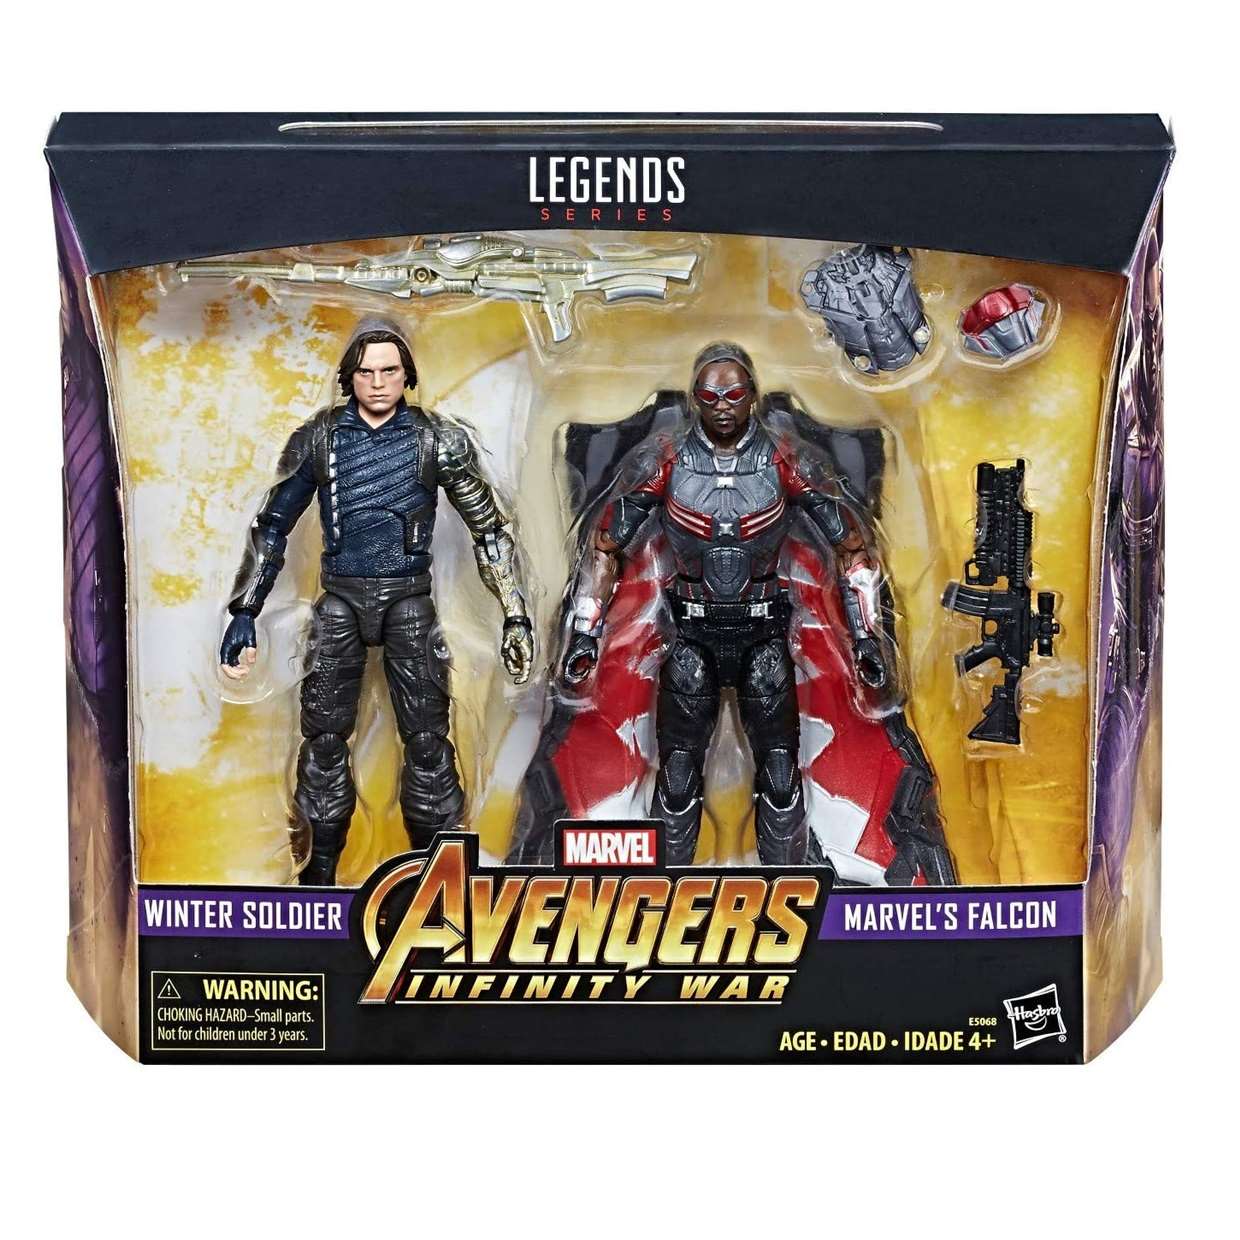 Pack 2 Figuras Winter Soldier & Falcon Infinity War Legends Series 6 Pulg